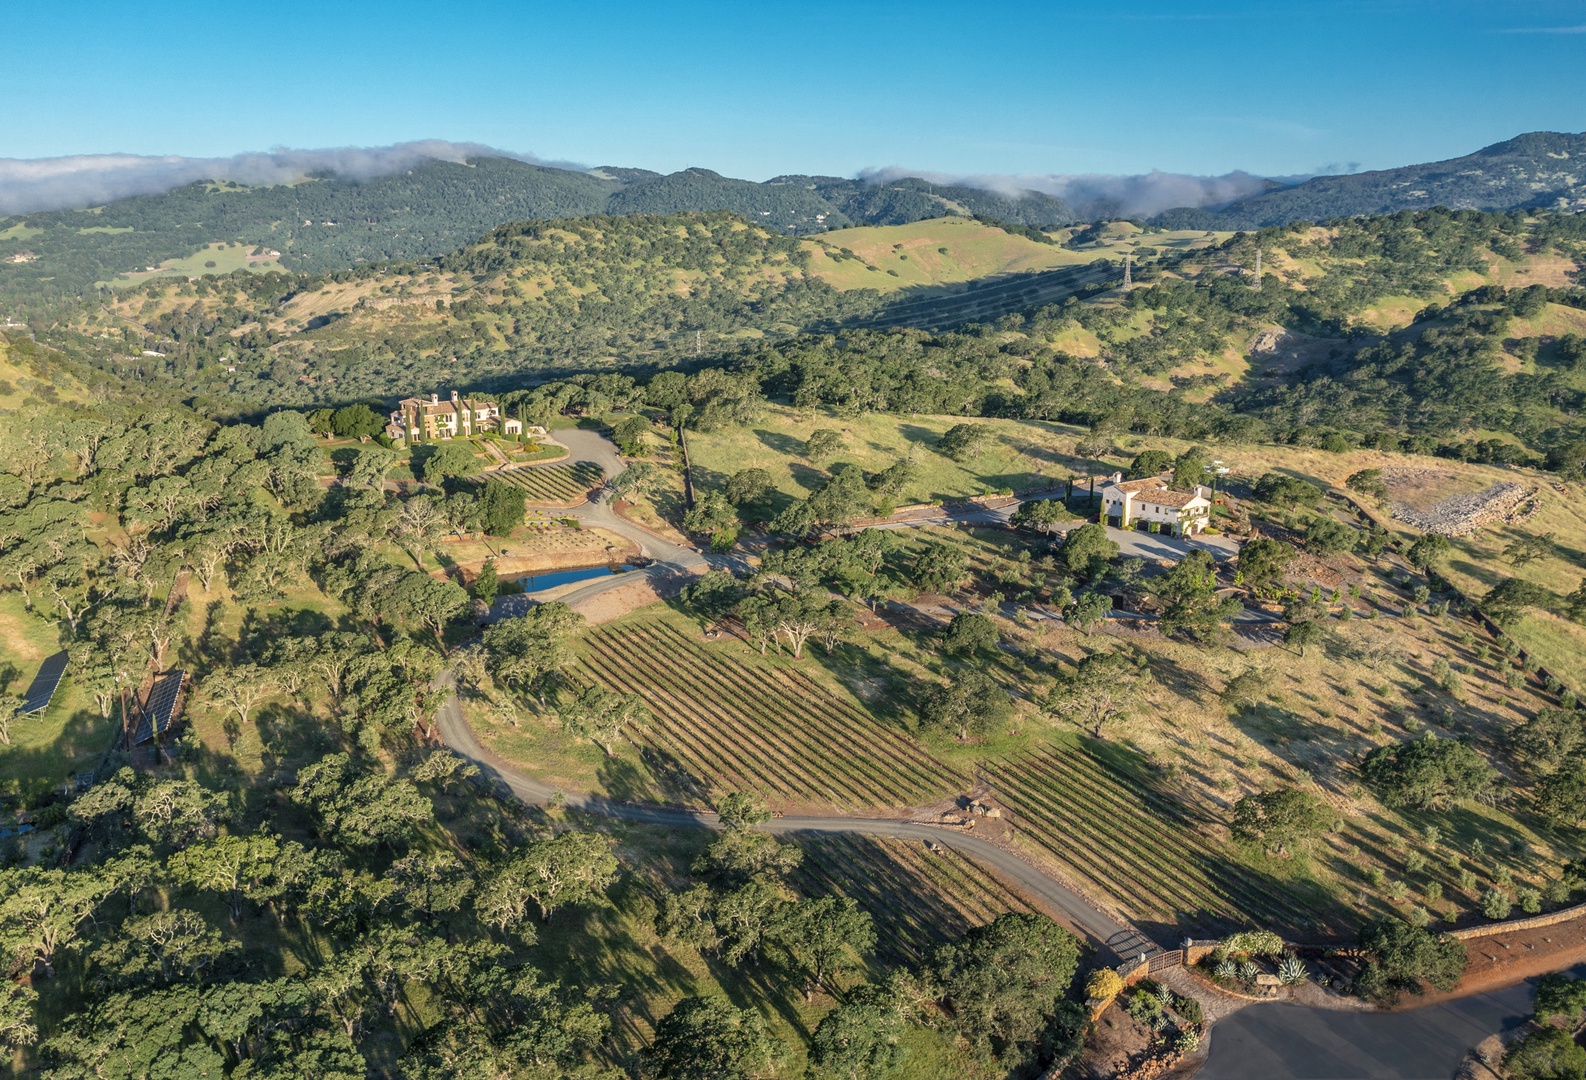 Fairfield Vacation Rentals, Villa Capricho - This expansive 25-acre estate is part of a gated community and sits on a private vineyard, overlooking Suisun Valley